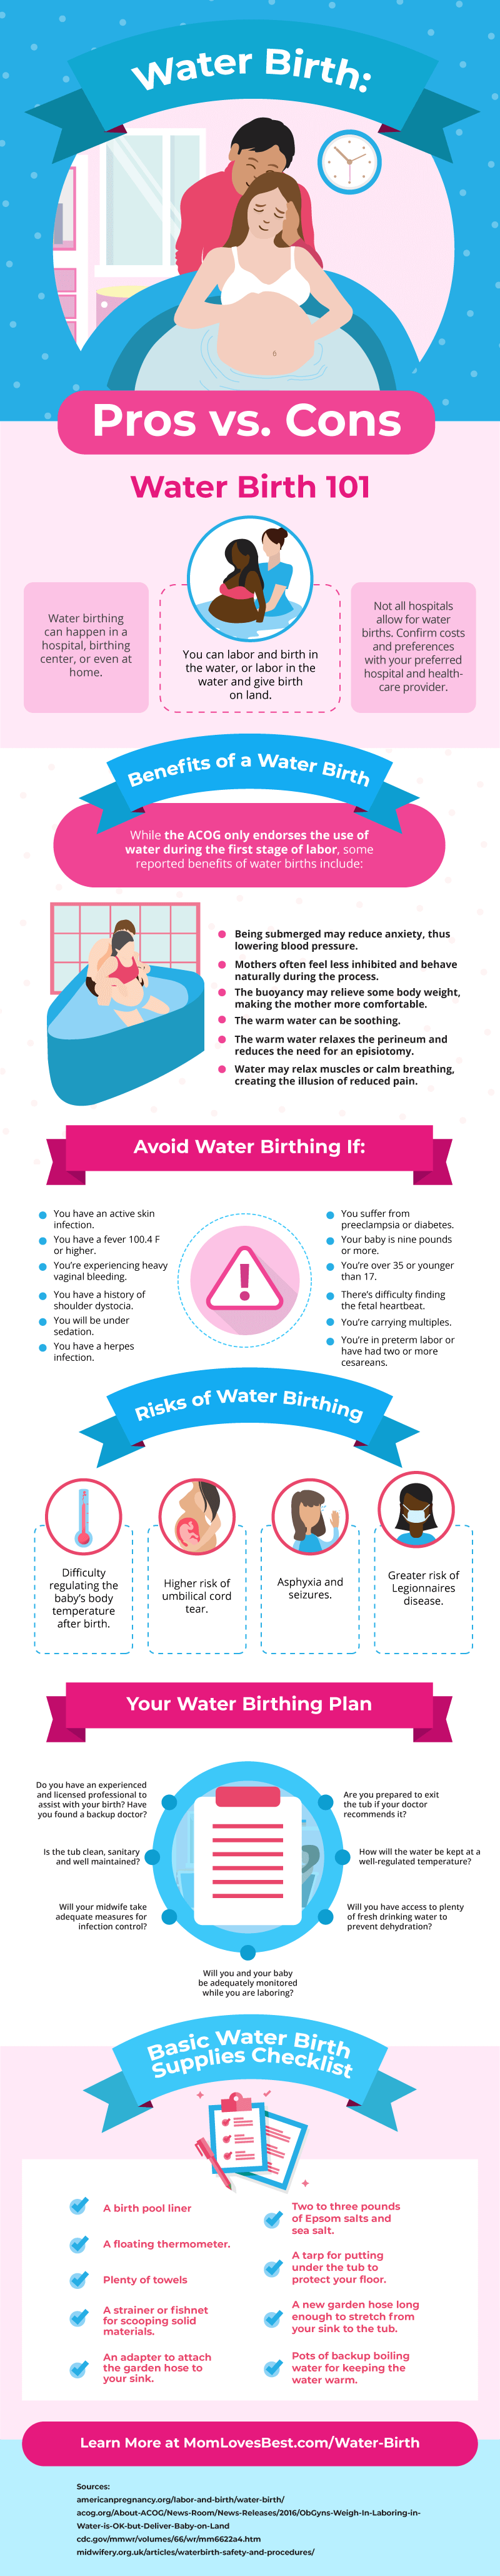 benefits and risks of water birth